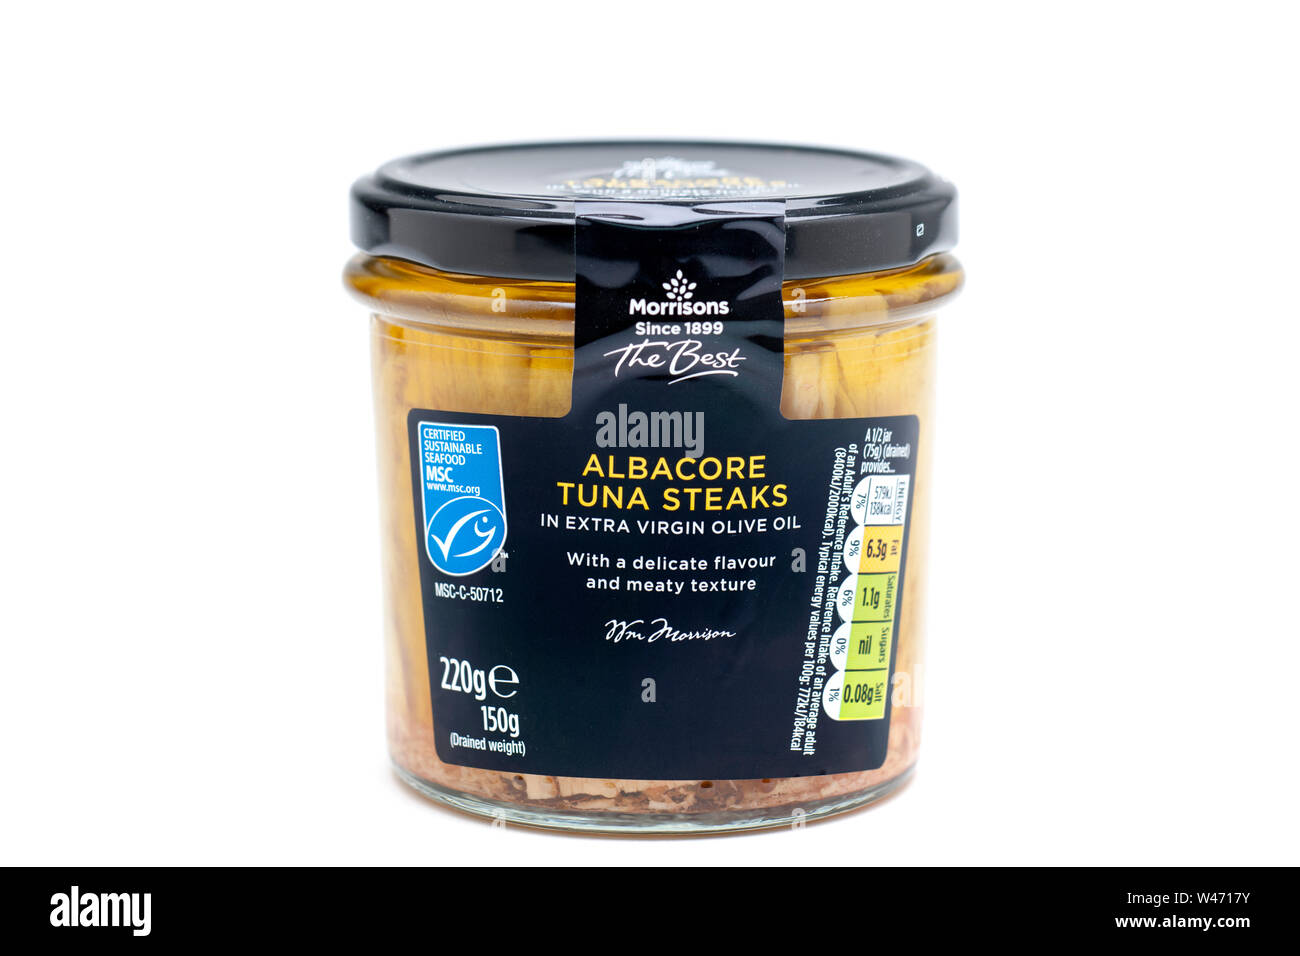 Albacore Tuna steaks in extra virgin olive oil from Morrisons Stock Photo